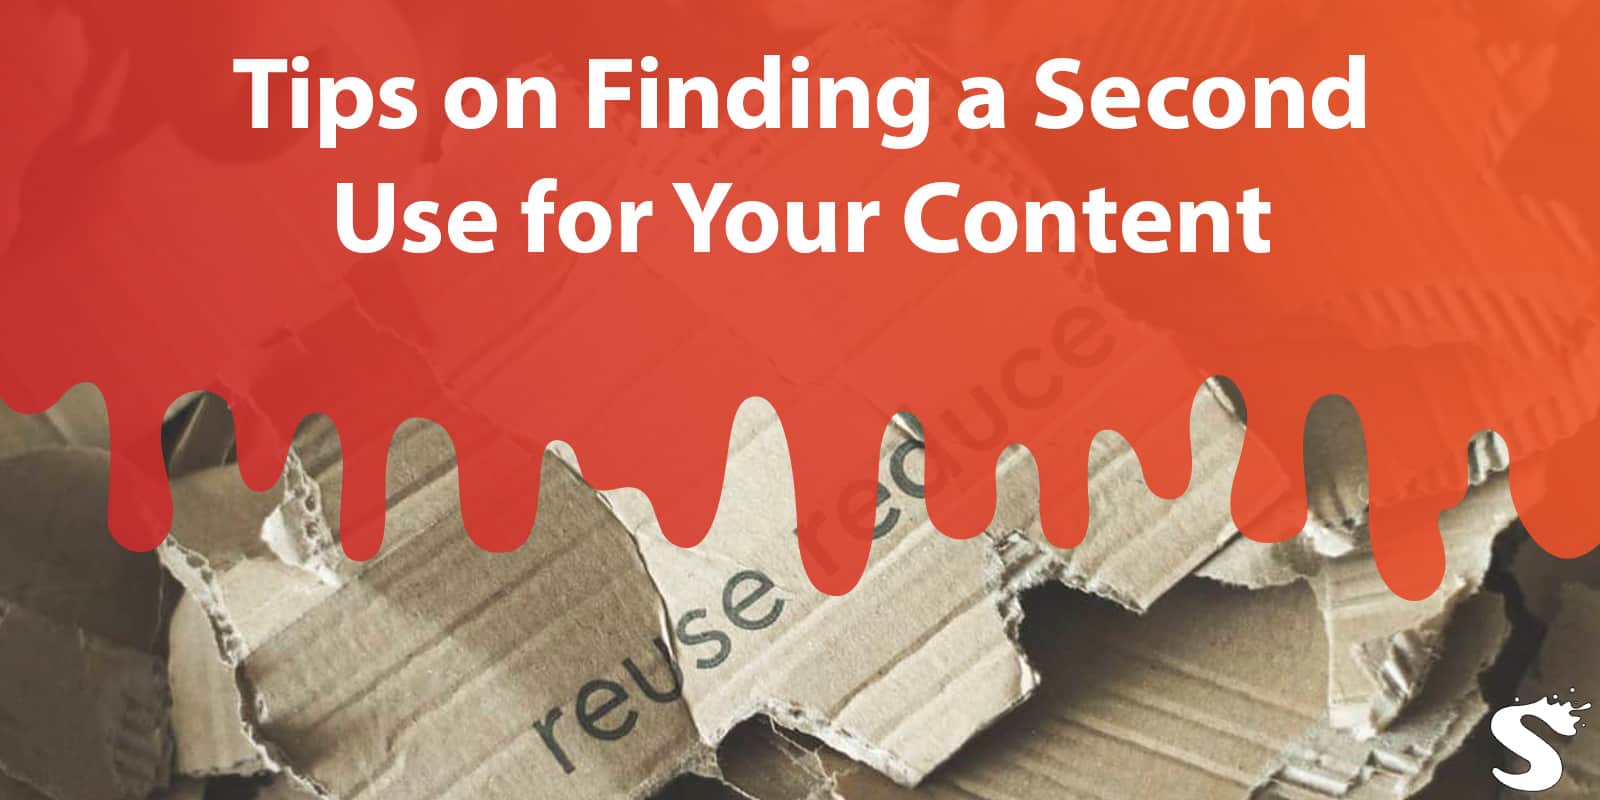 Tips on Finding a Second Use for Your Content